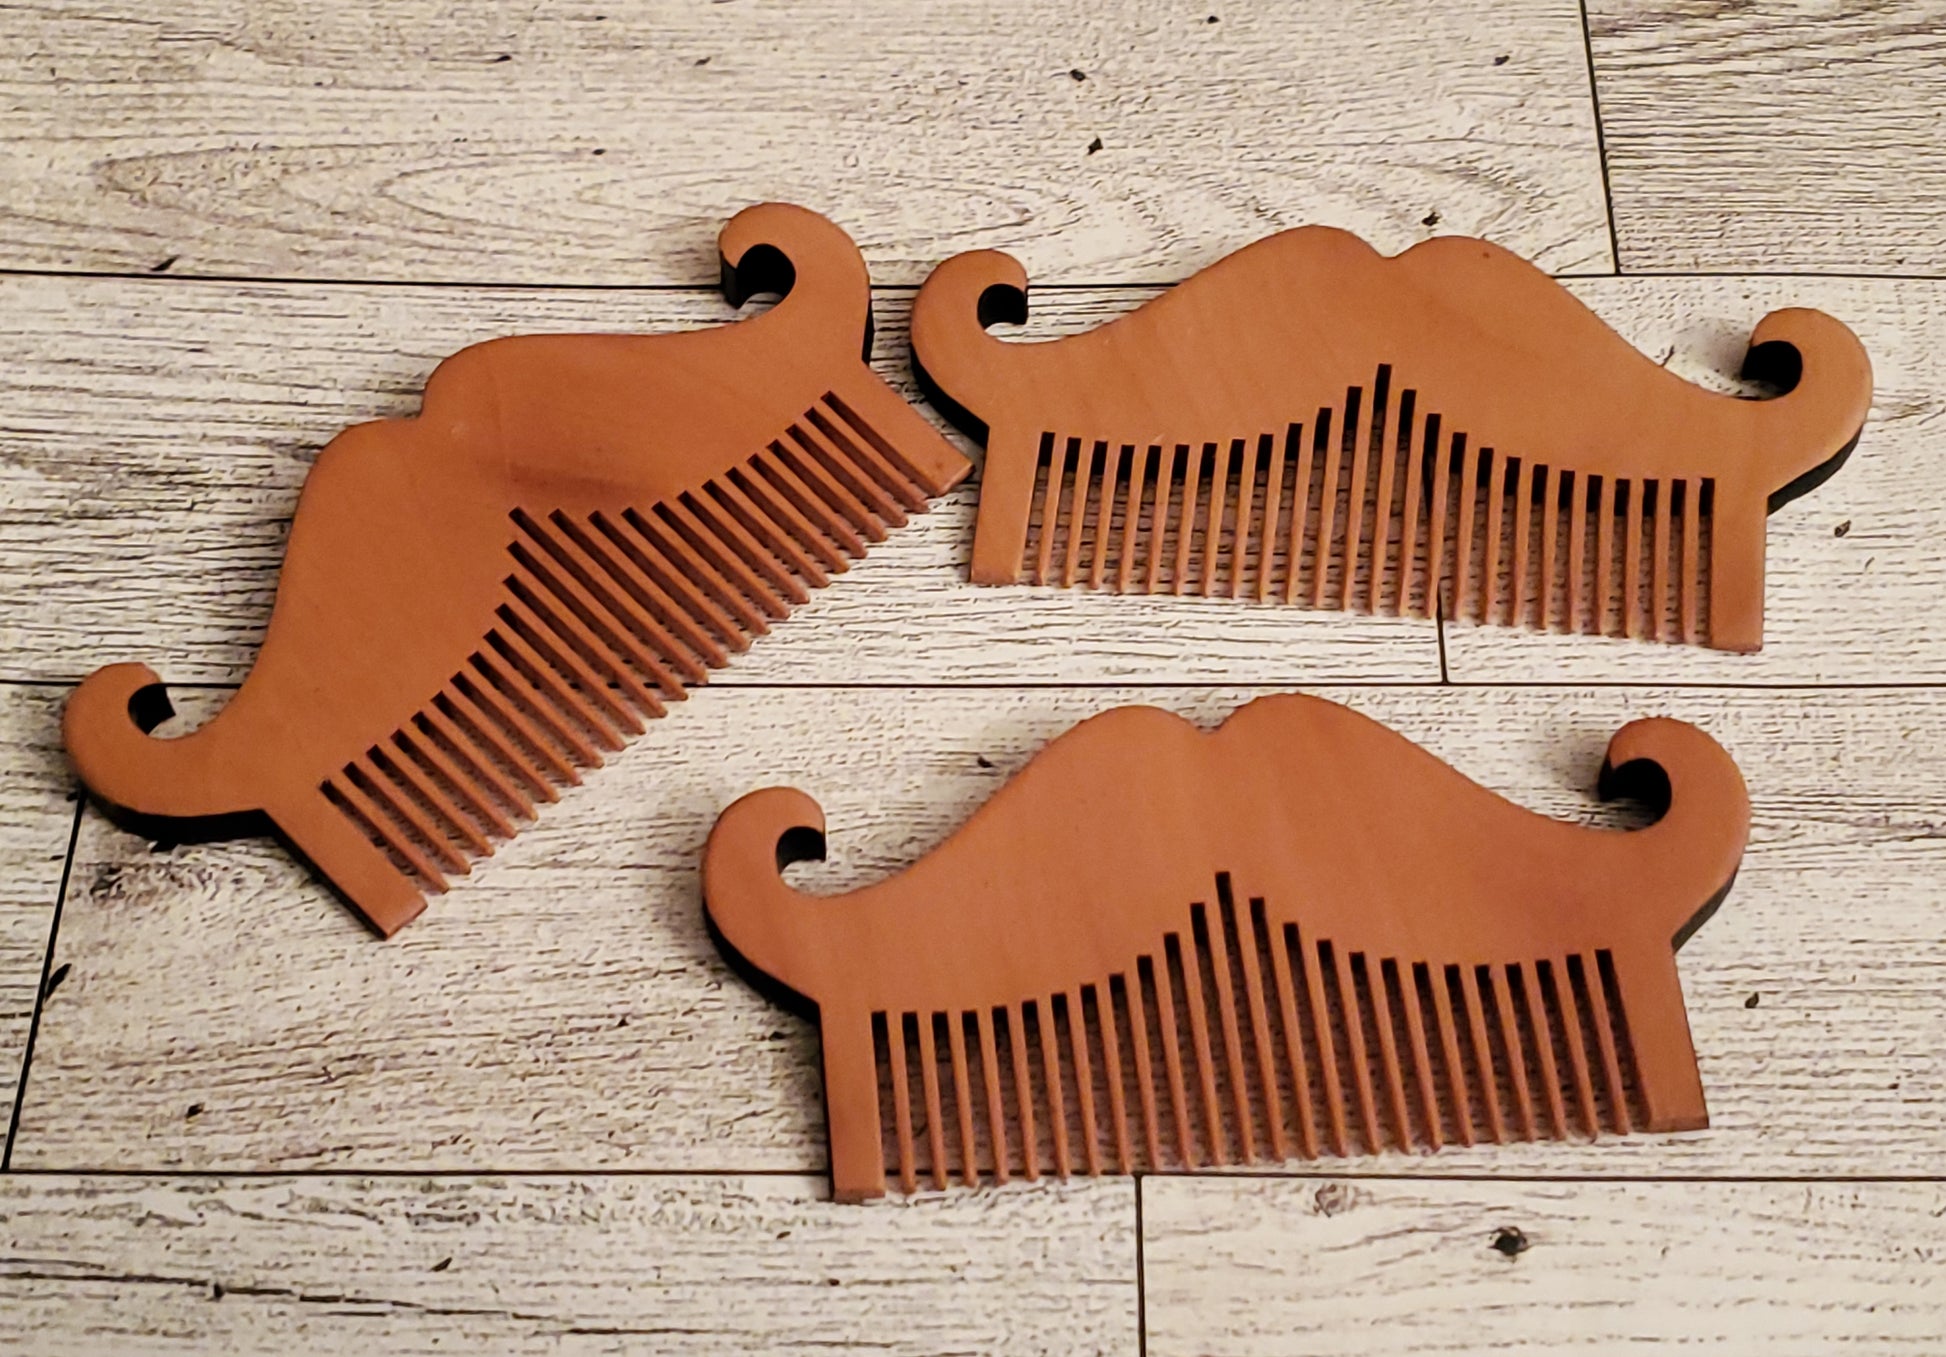 3 Mustache Combs shown together